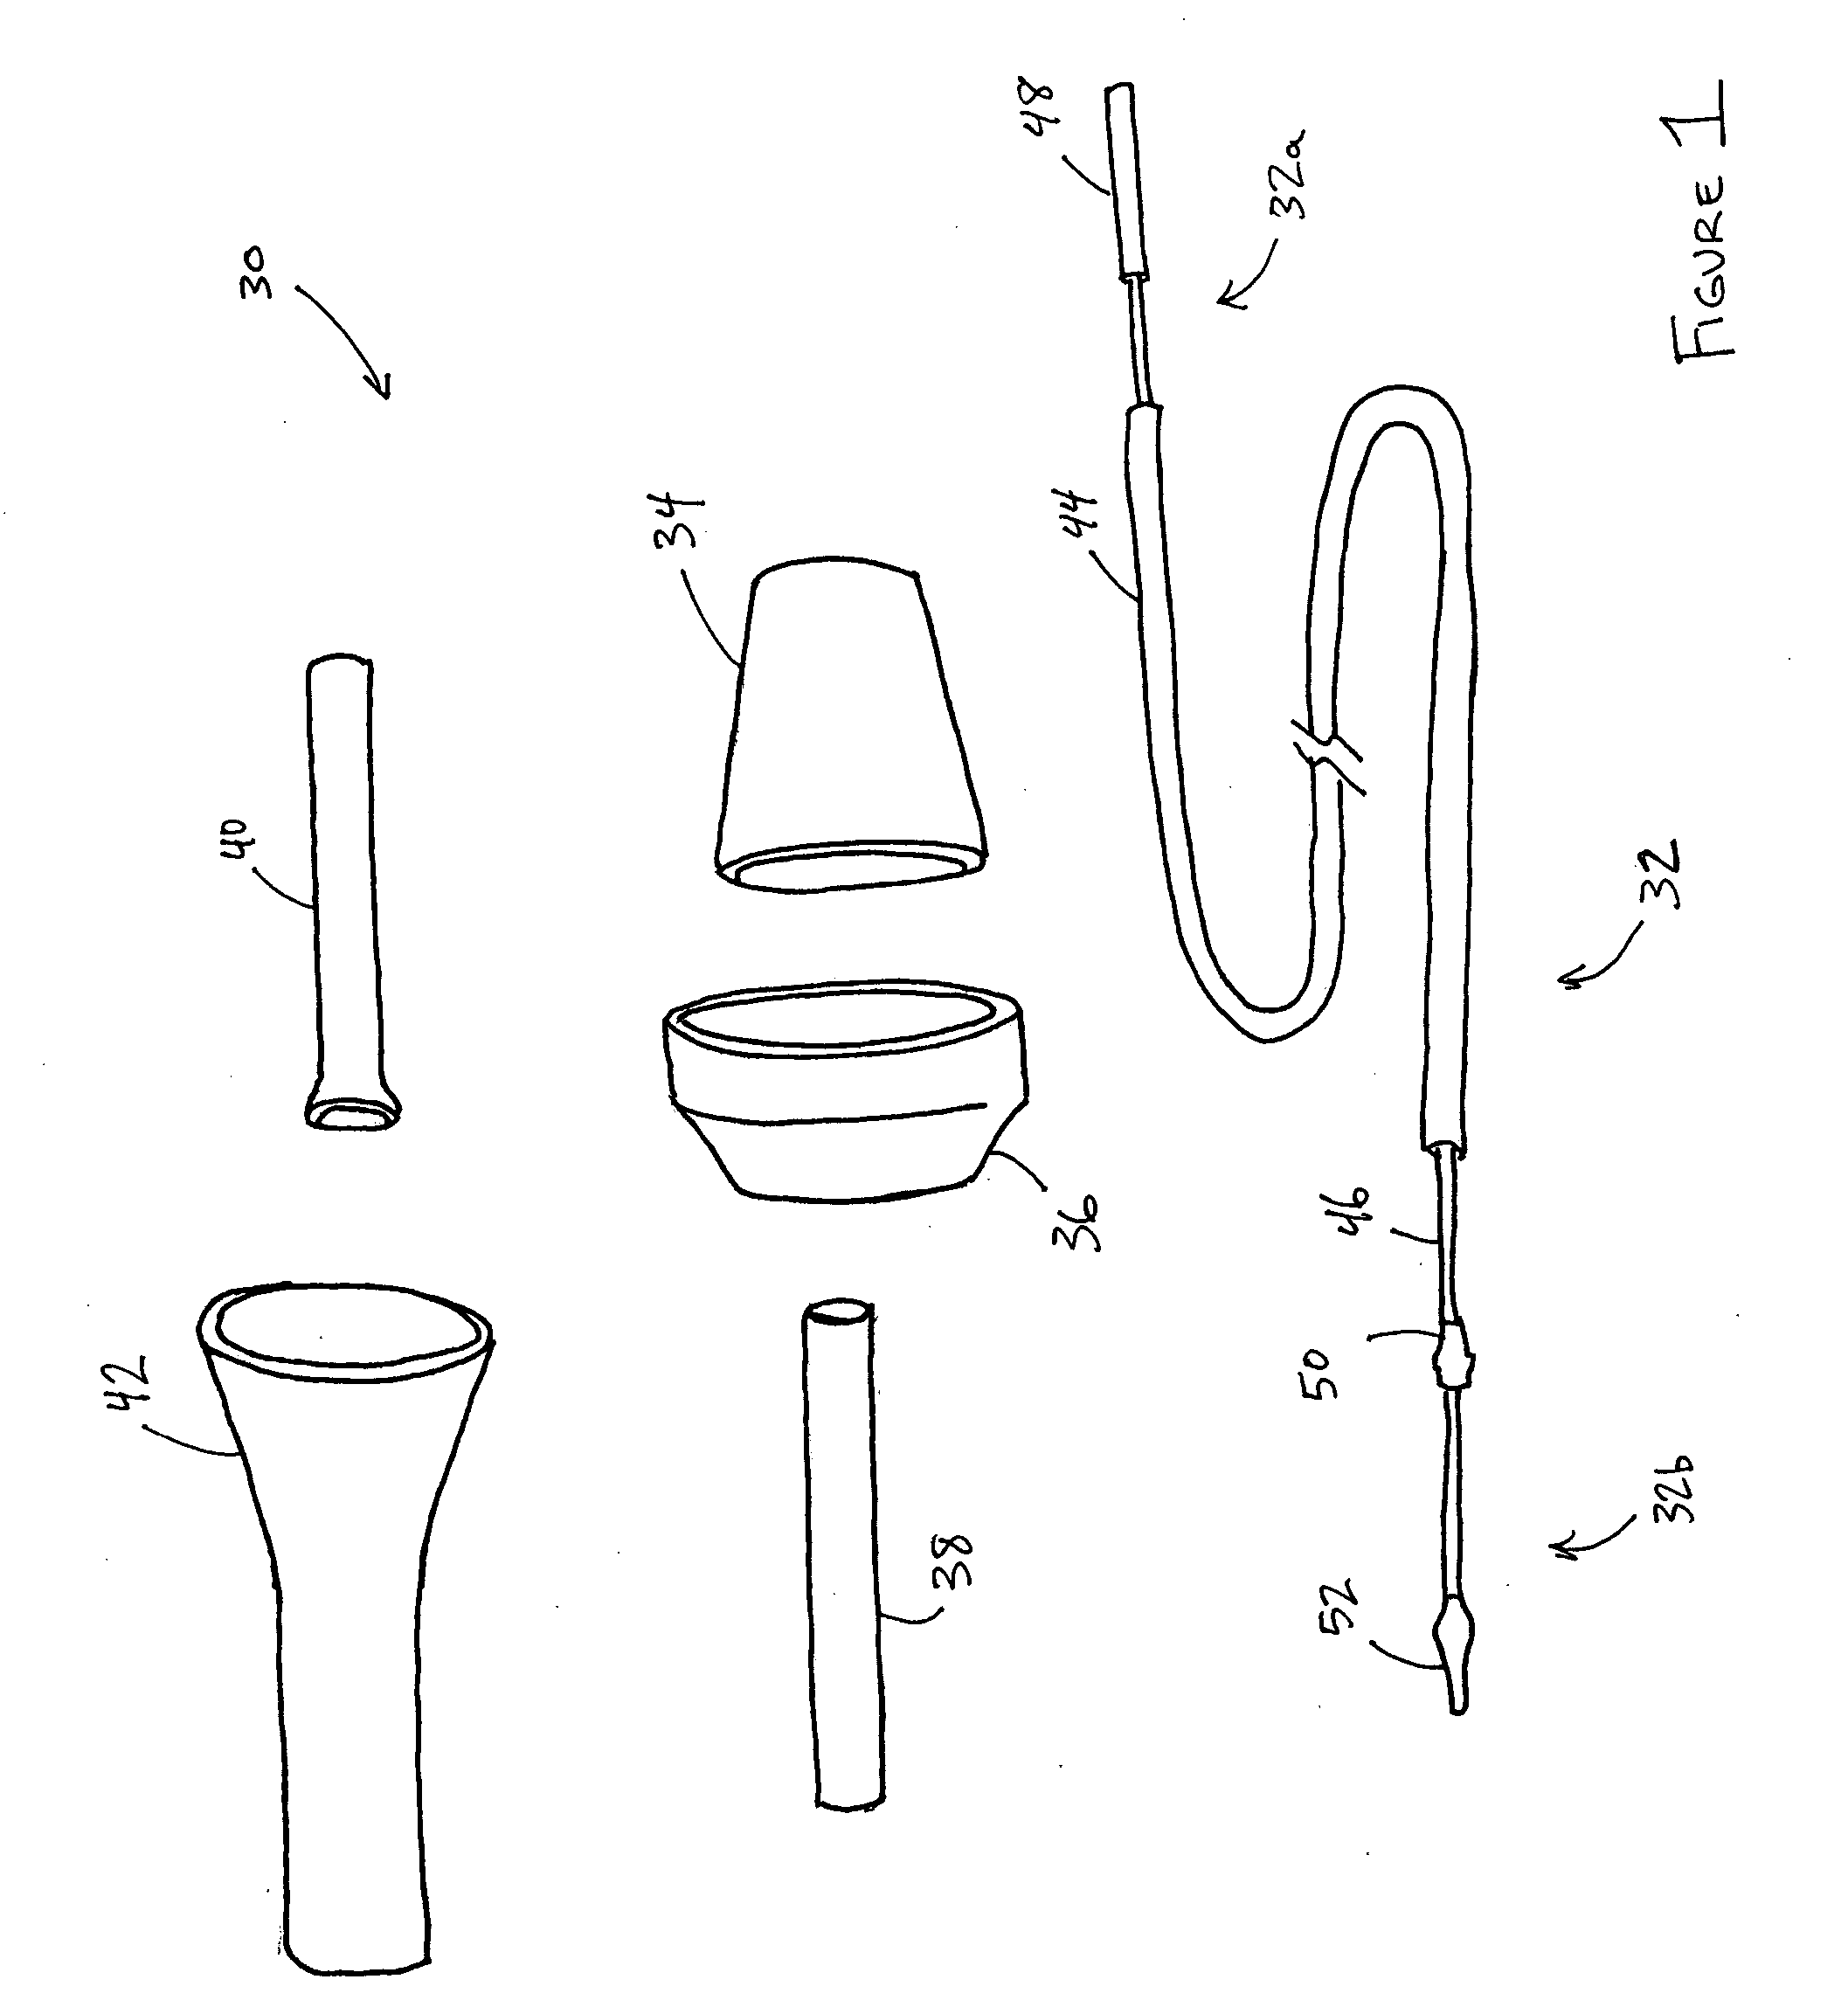 Systems and methods for loading a prosthesis onto a minimally invasive delivery system